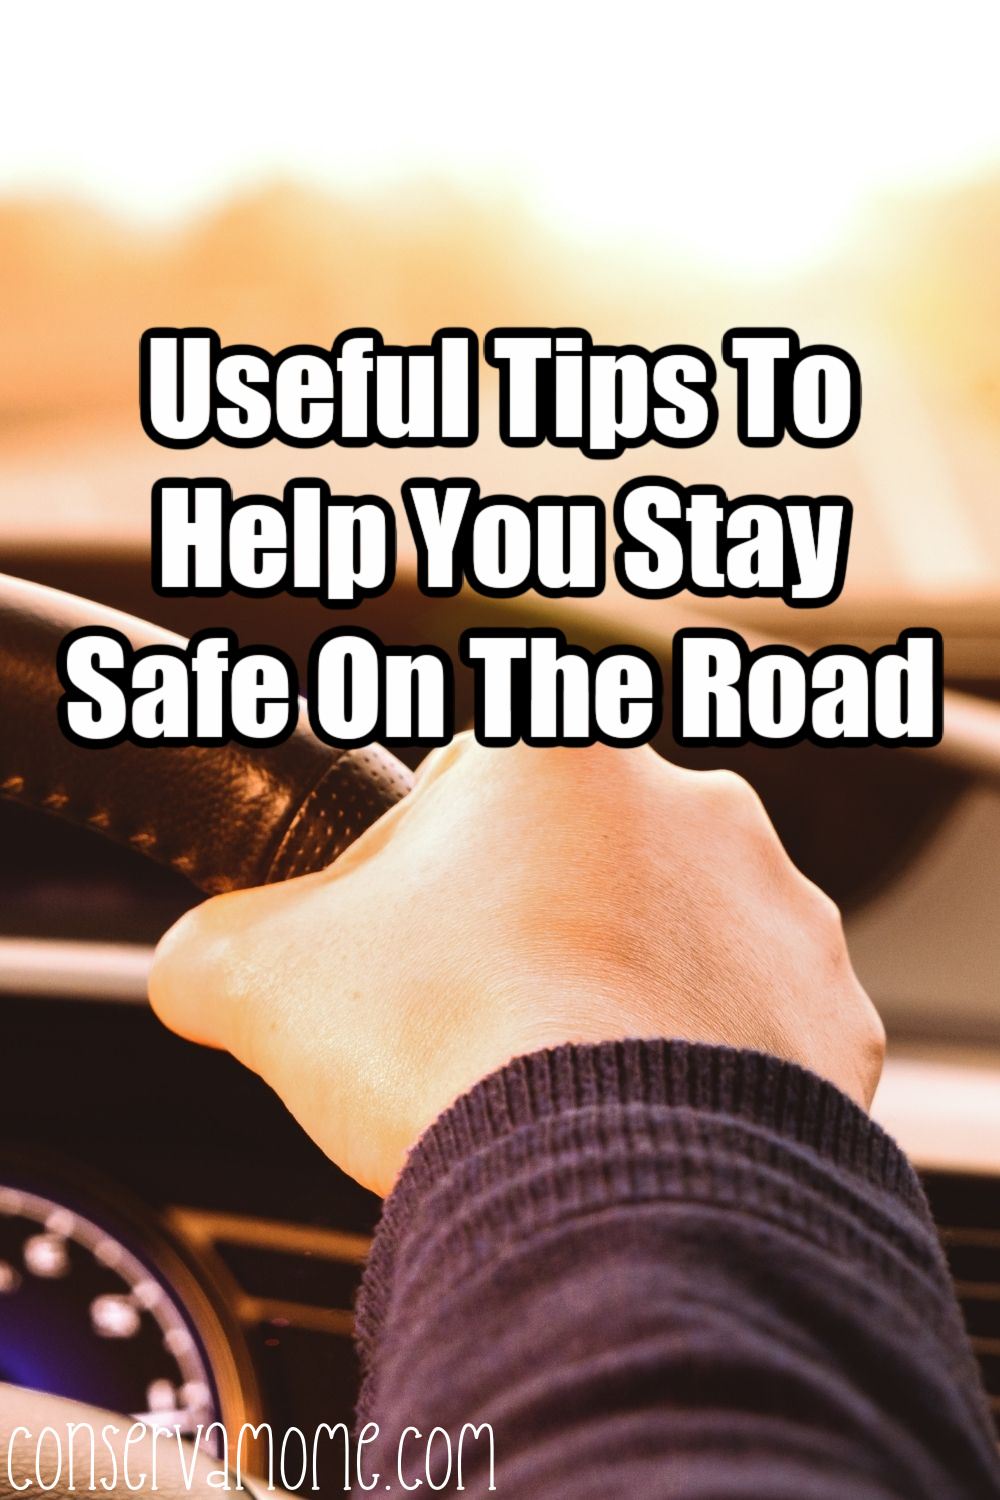 Useful Tips to Help you stay safe on the road